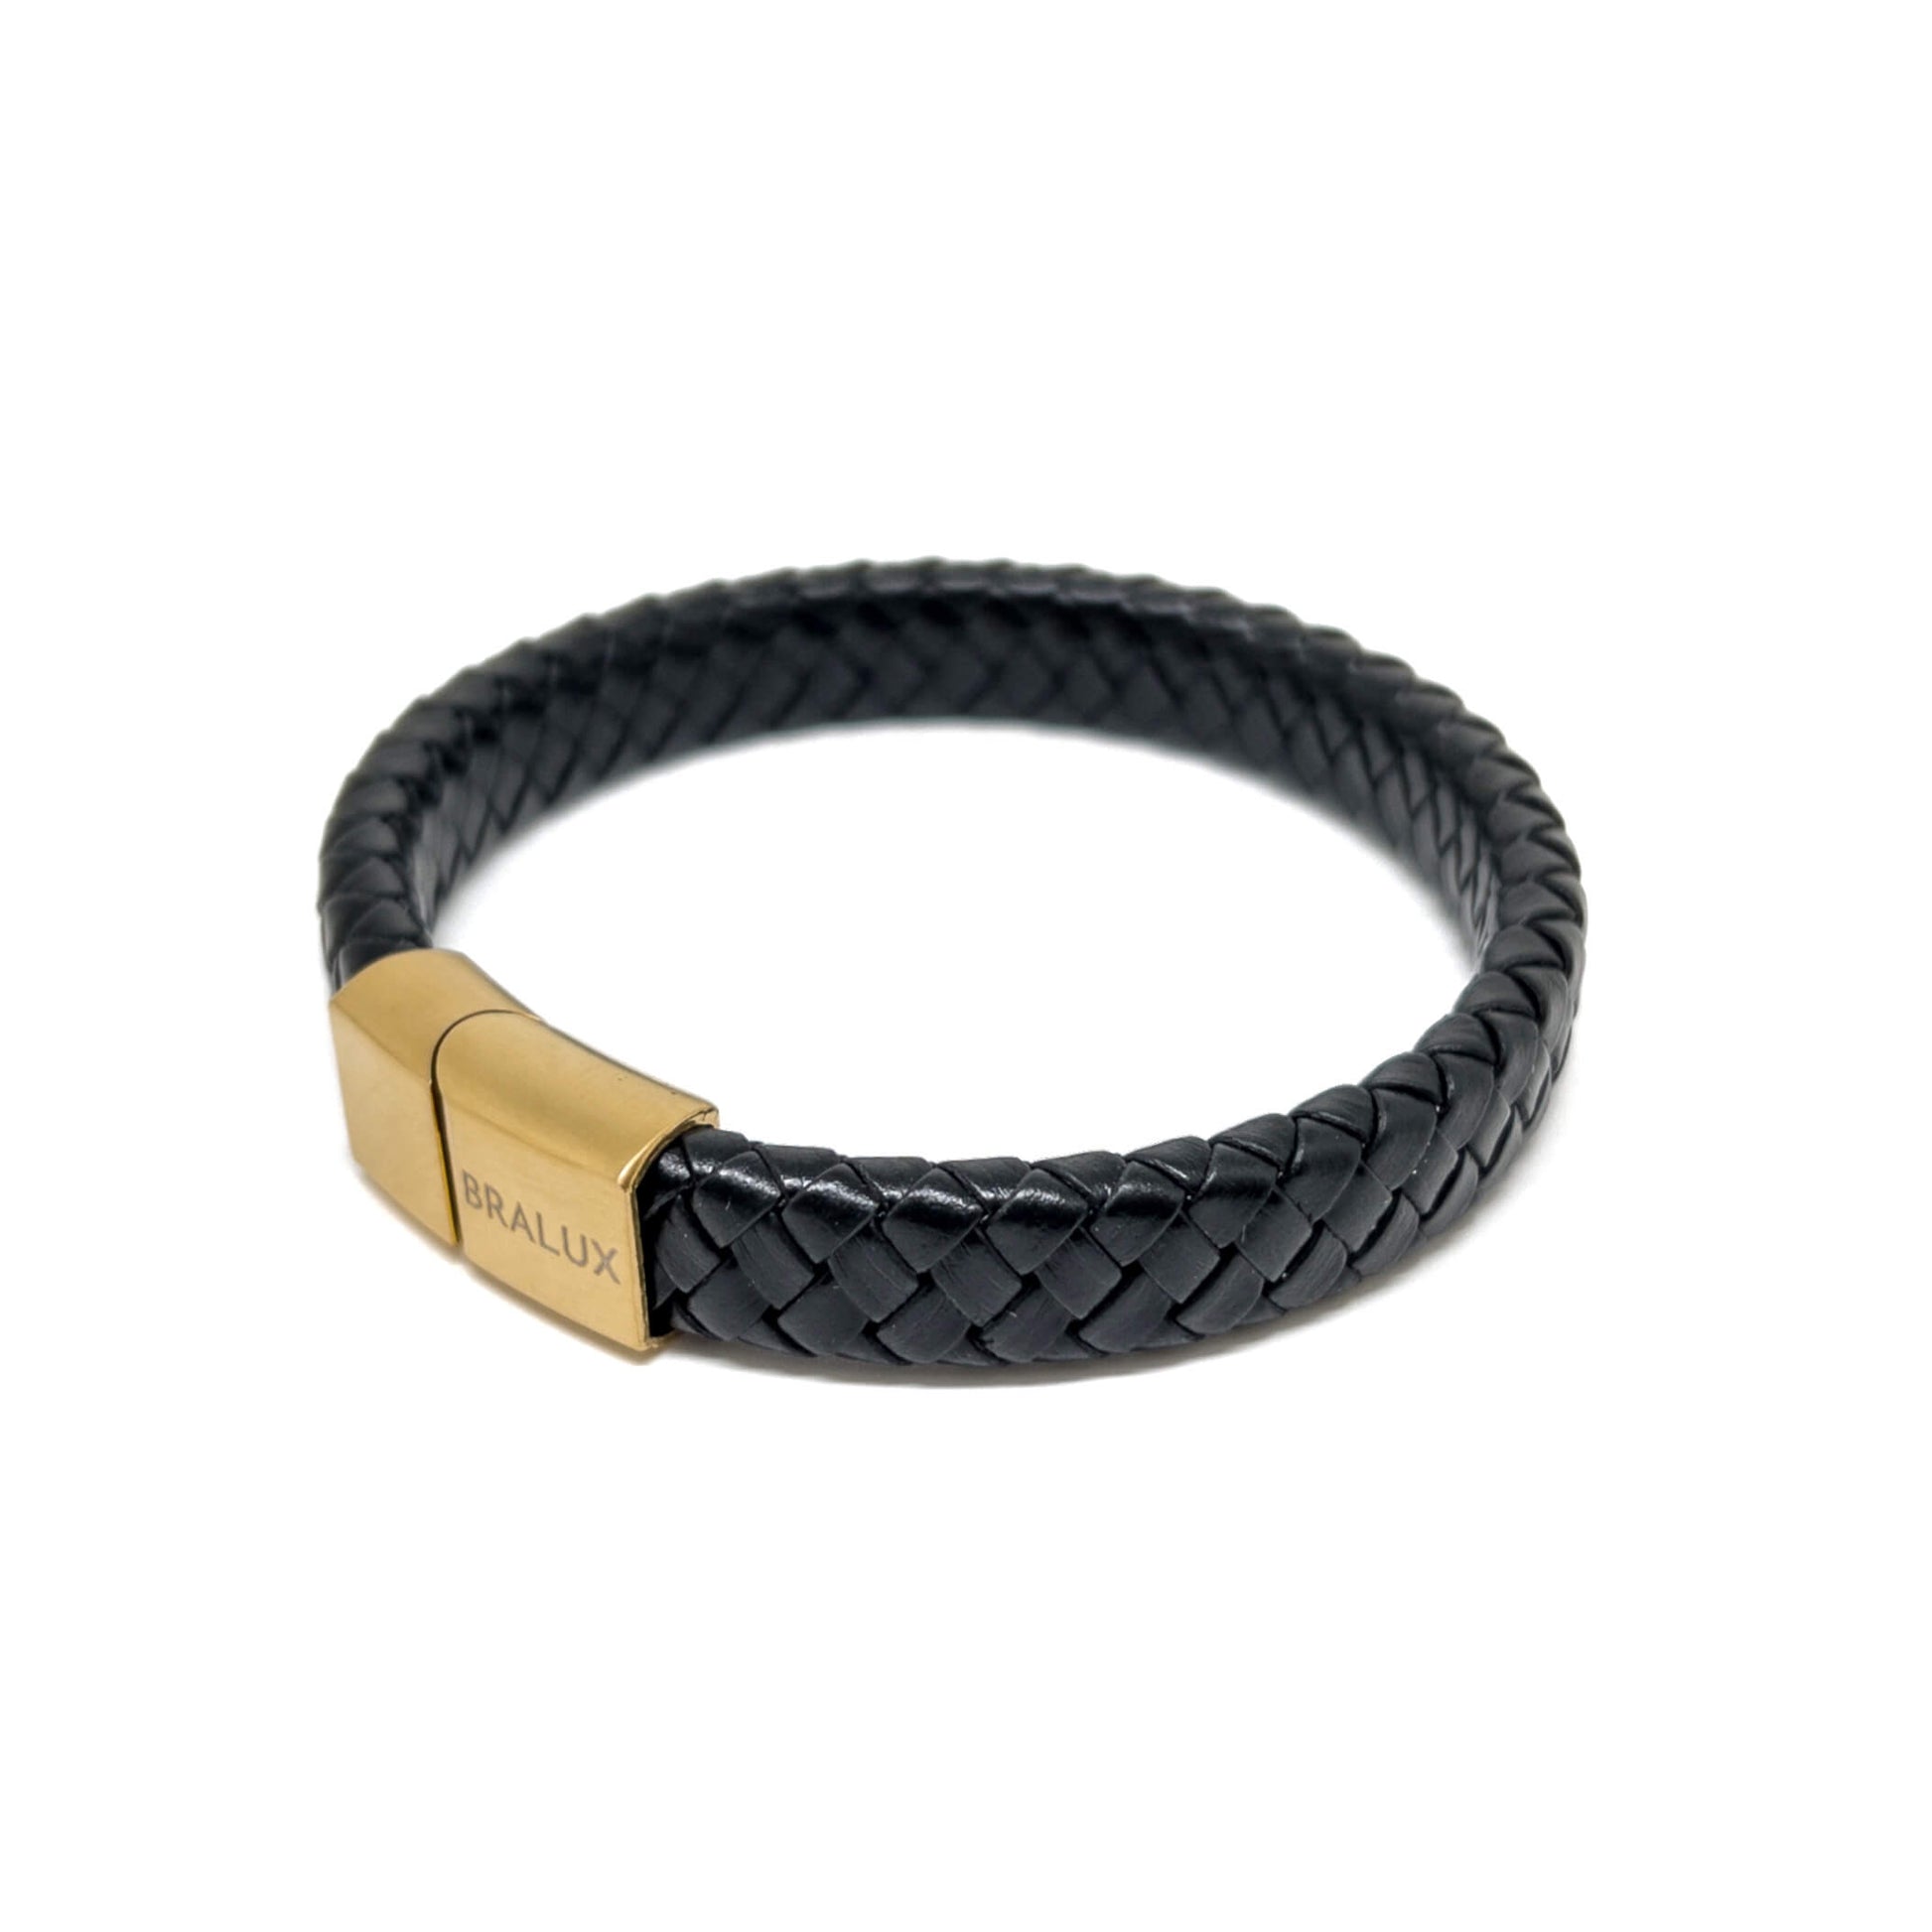 BRALUX - The Black and Gold plated leather bracelet – Bralux